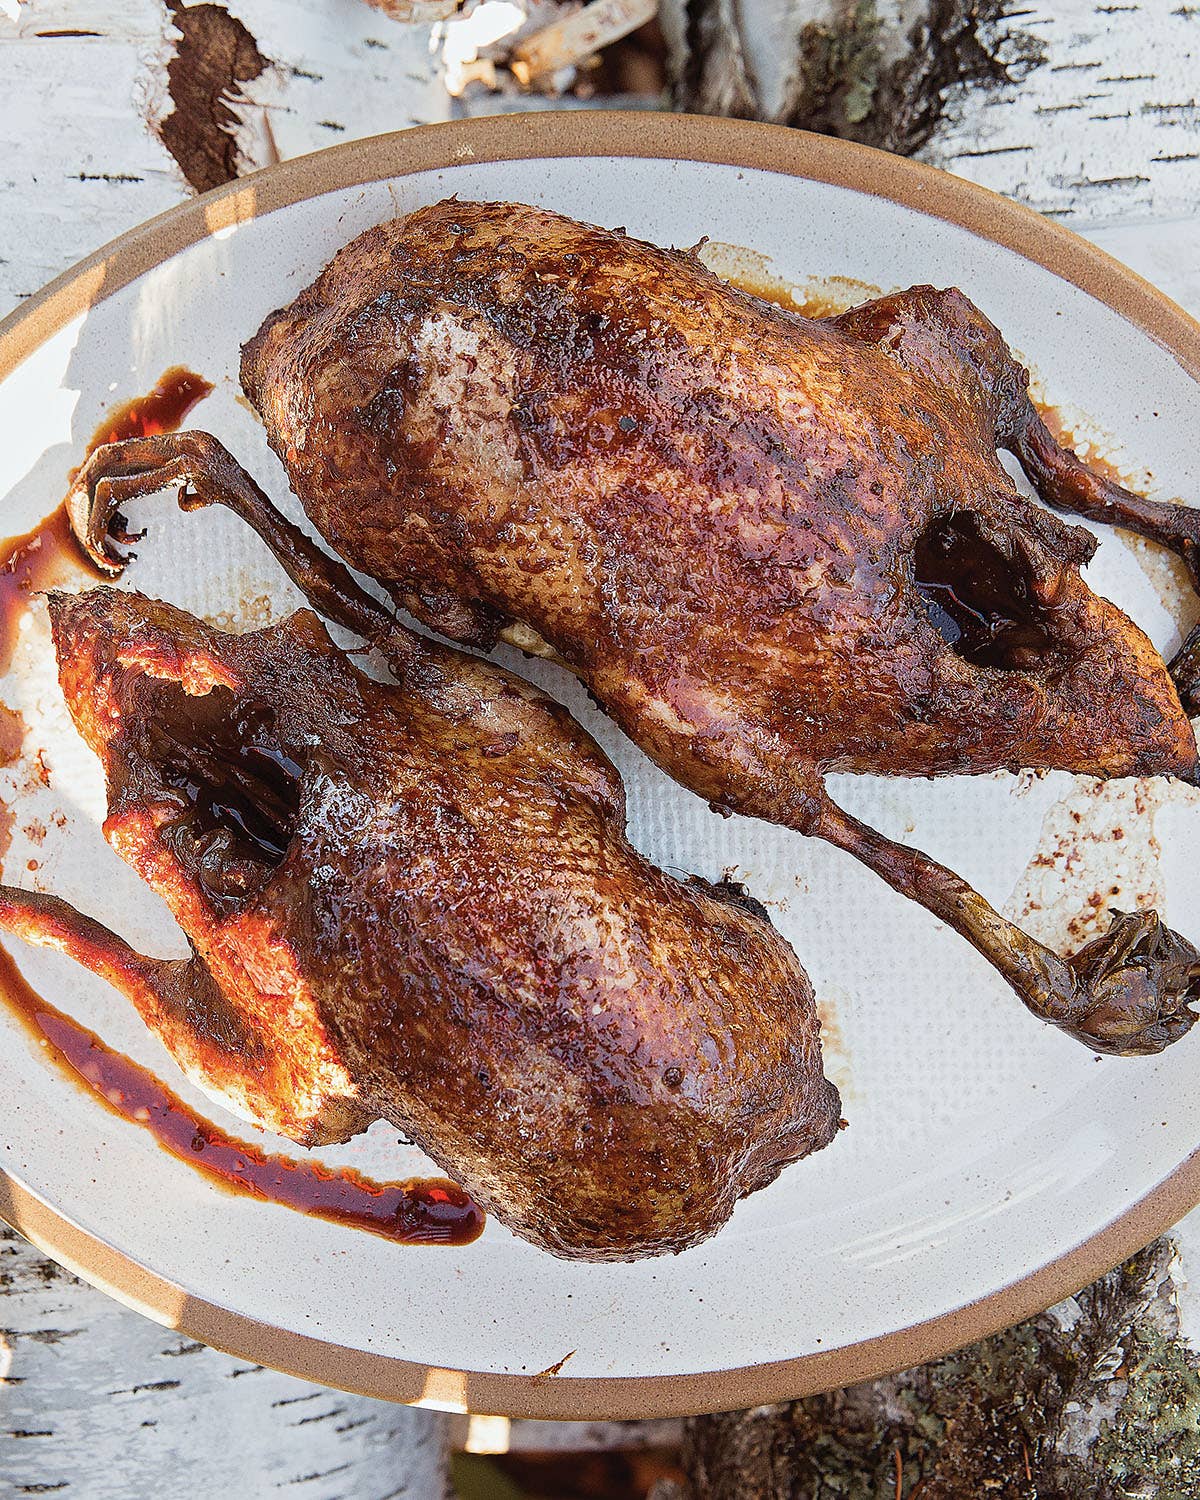 Birch Syrup and Soy Sauce-Glazed Roast Duck